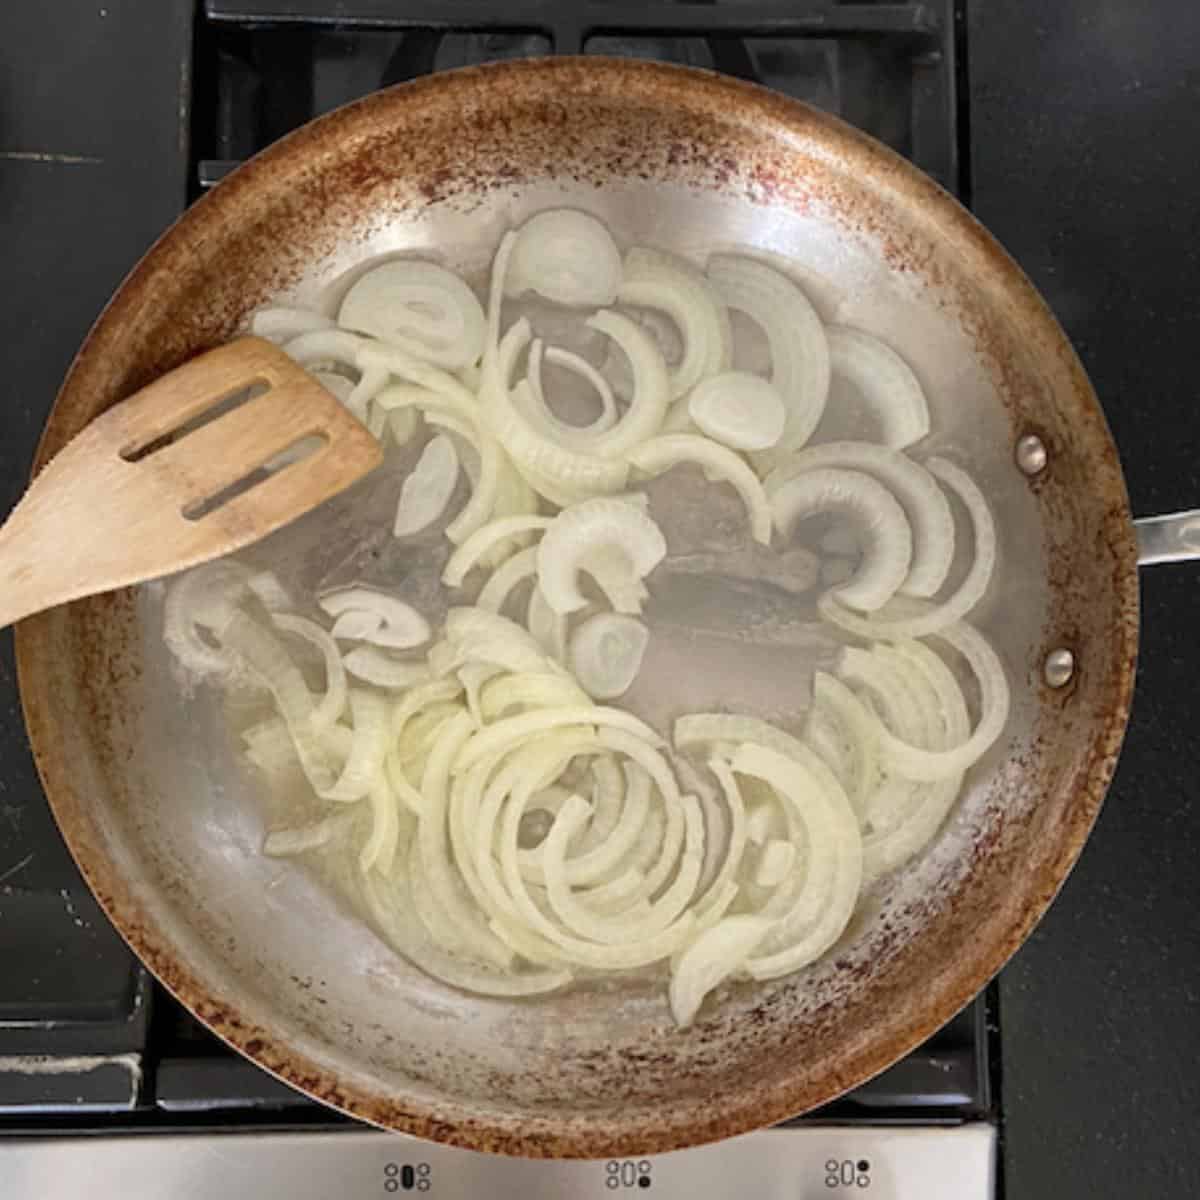 onions tossed into butter in pan with wooden spoon